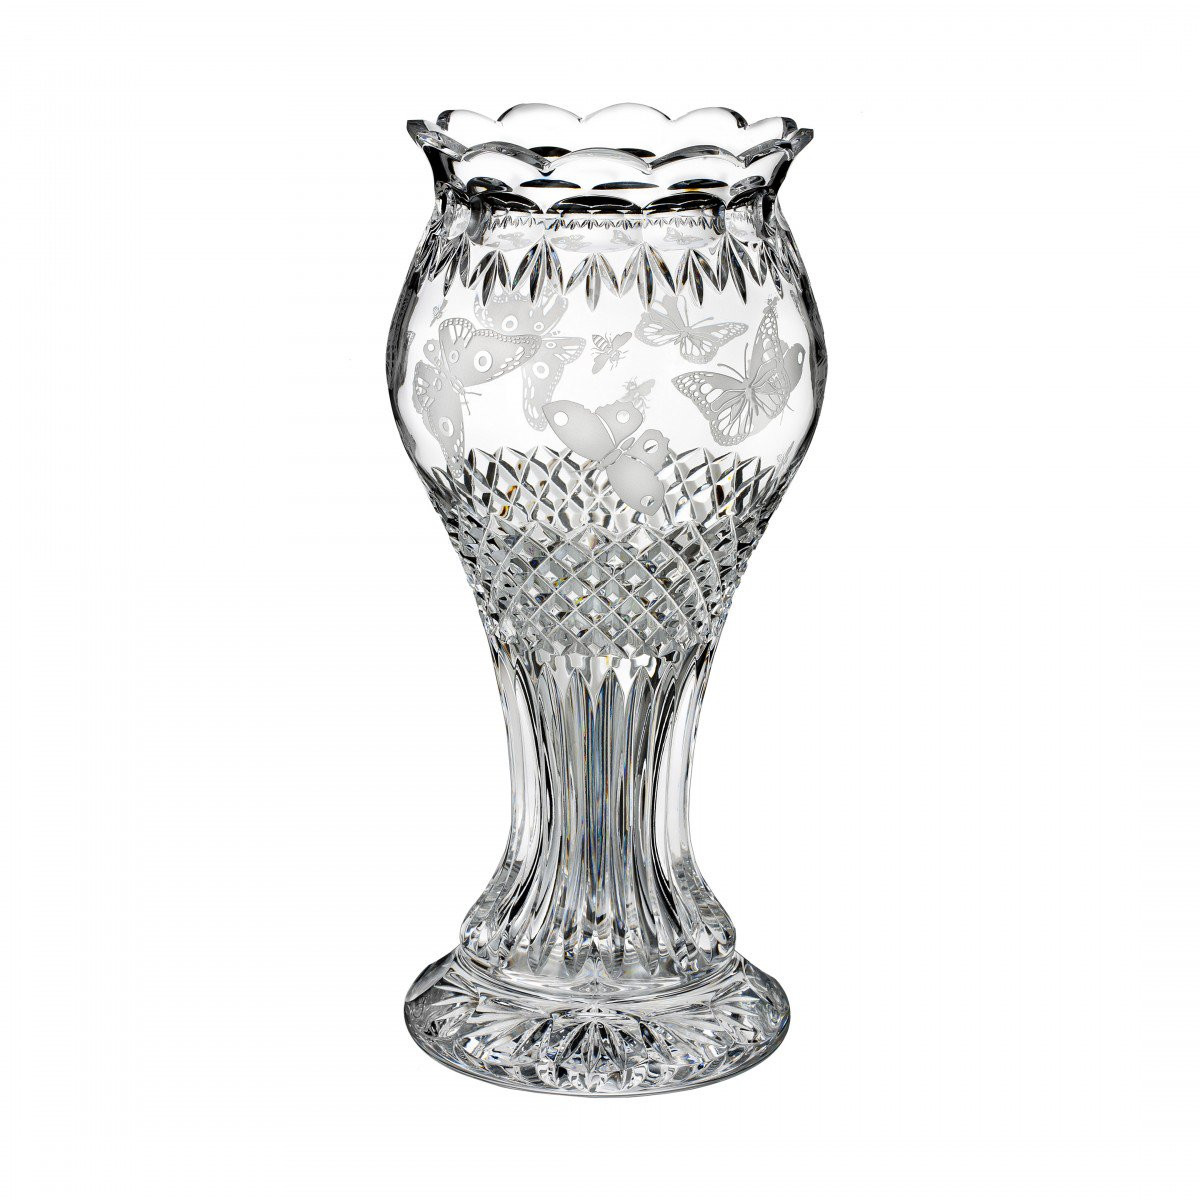 14 attractive Waterford Markham Vase 2024 free download waterford markham vase of martin ryan butter bee 14in vase house of waterford crystal us pertaining to martin ryan butter bee 14in vase